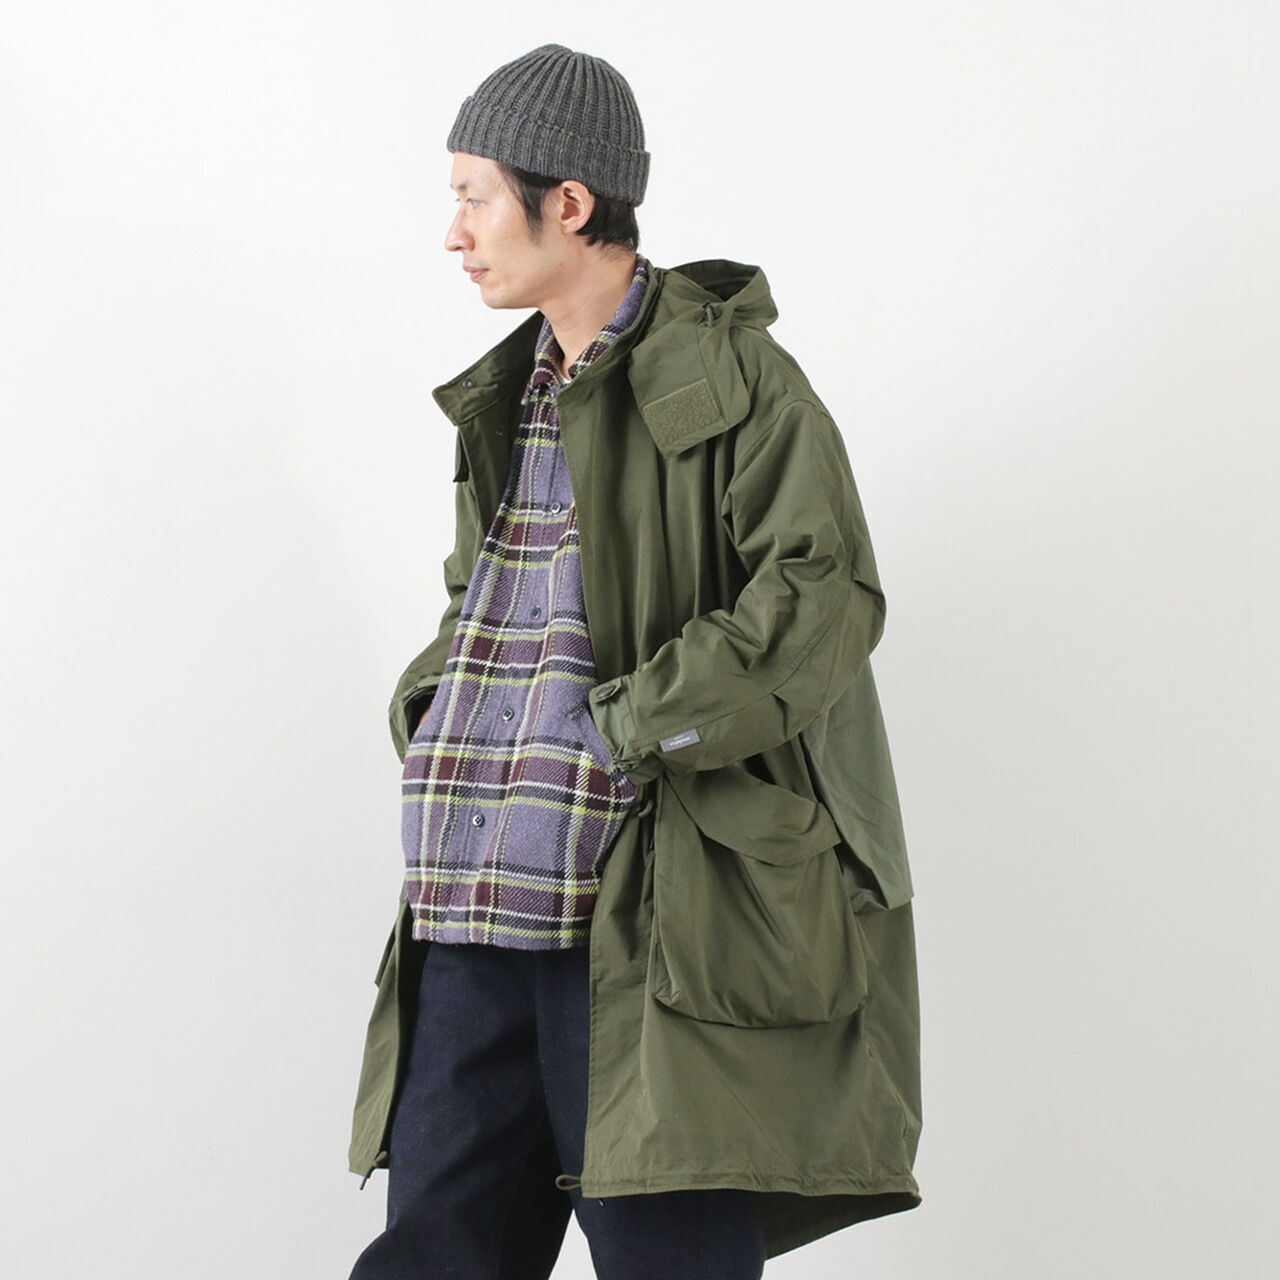 Componentise Military Coat,Olive, large image number 0